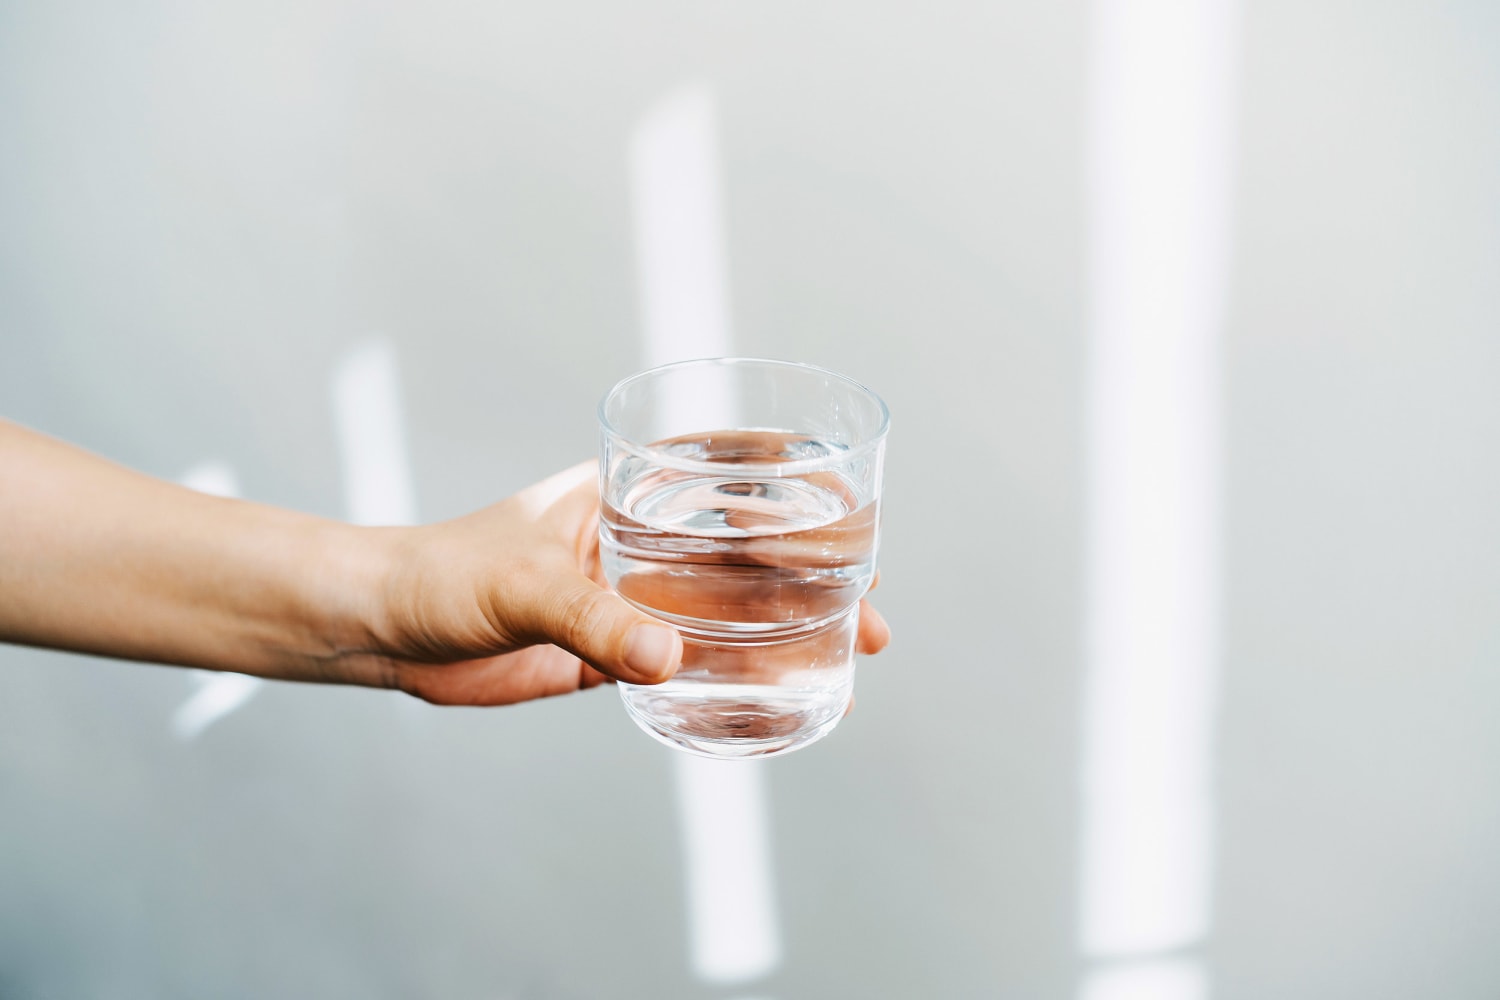 Toxic 'forever chemicals' are everywhere. Can you actually avoid PFAS? 4 strategies from experts